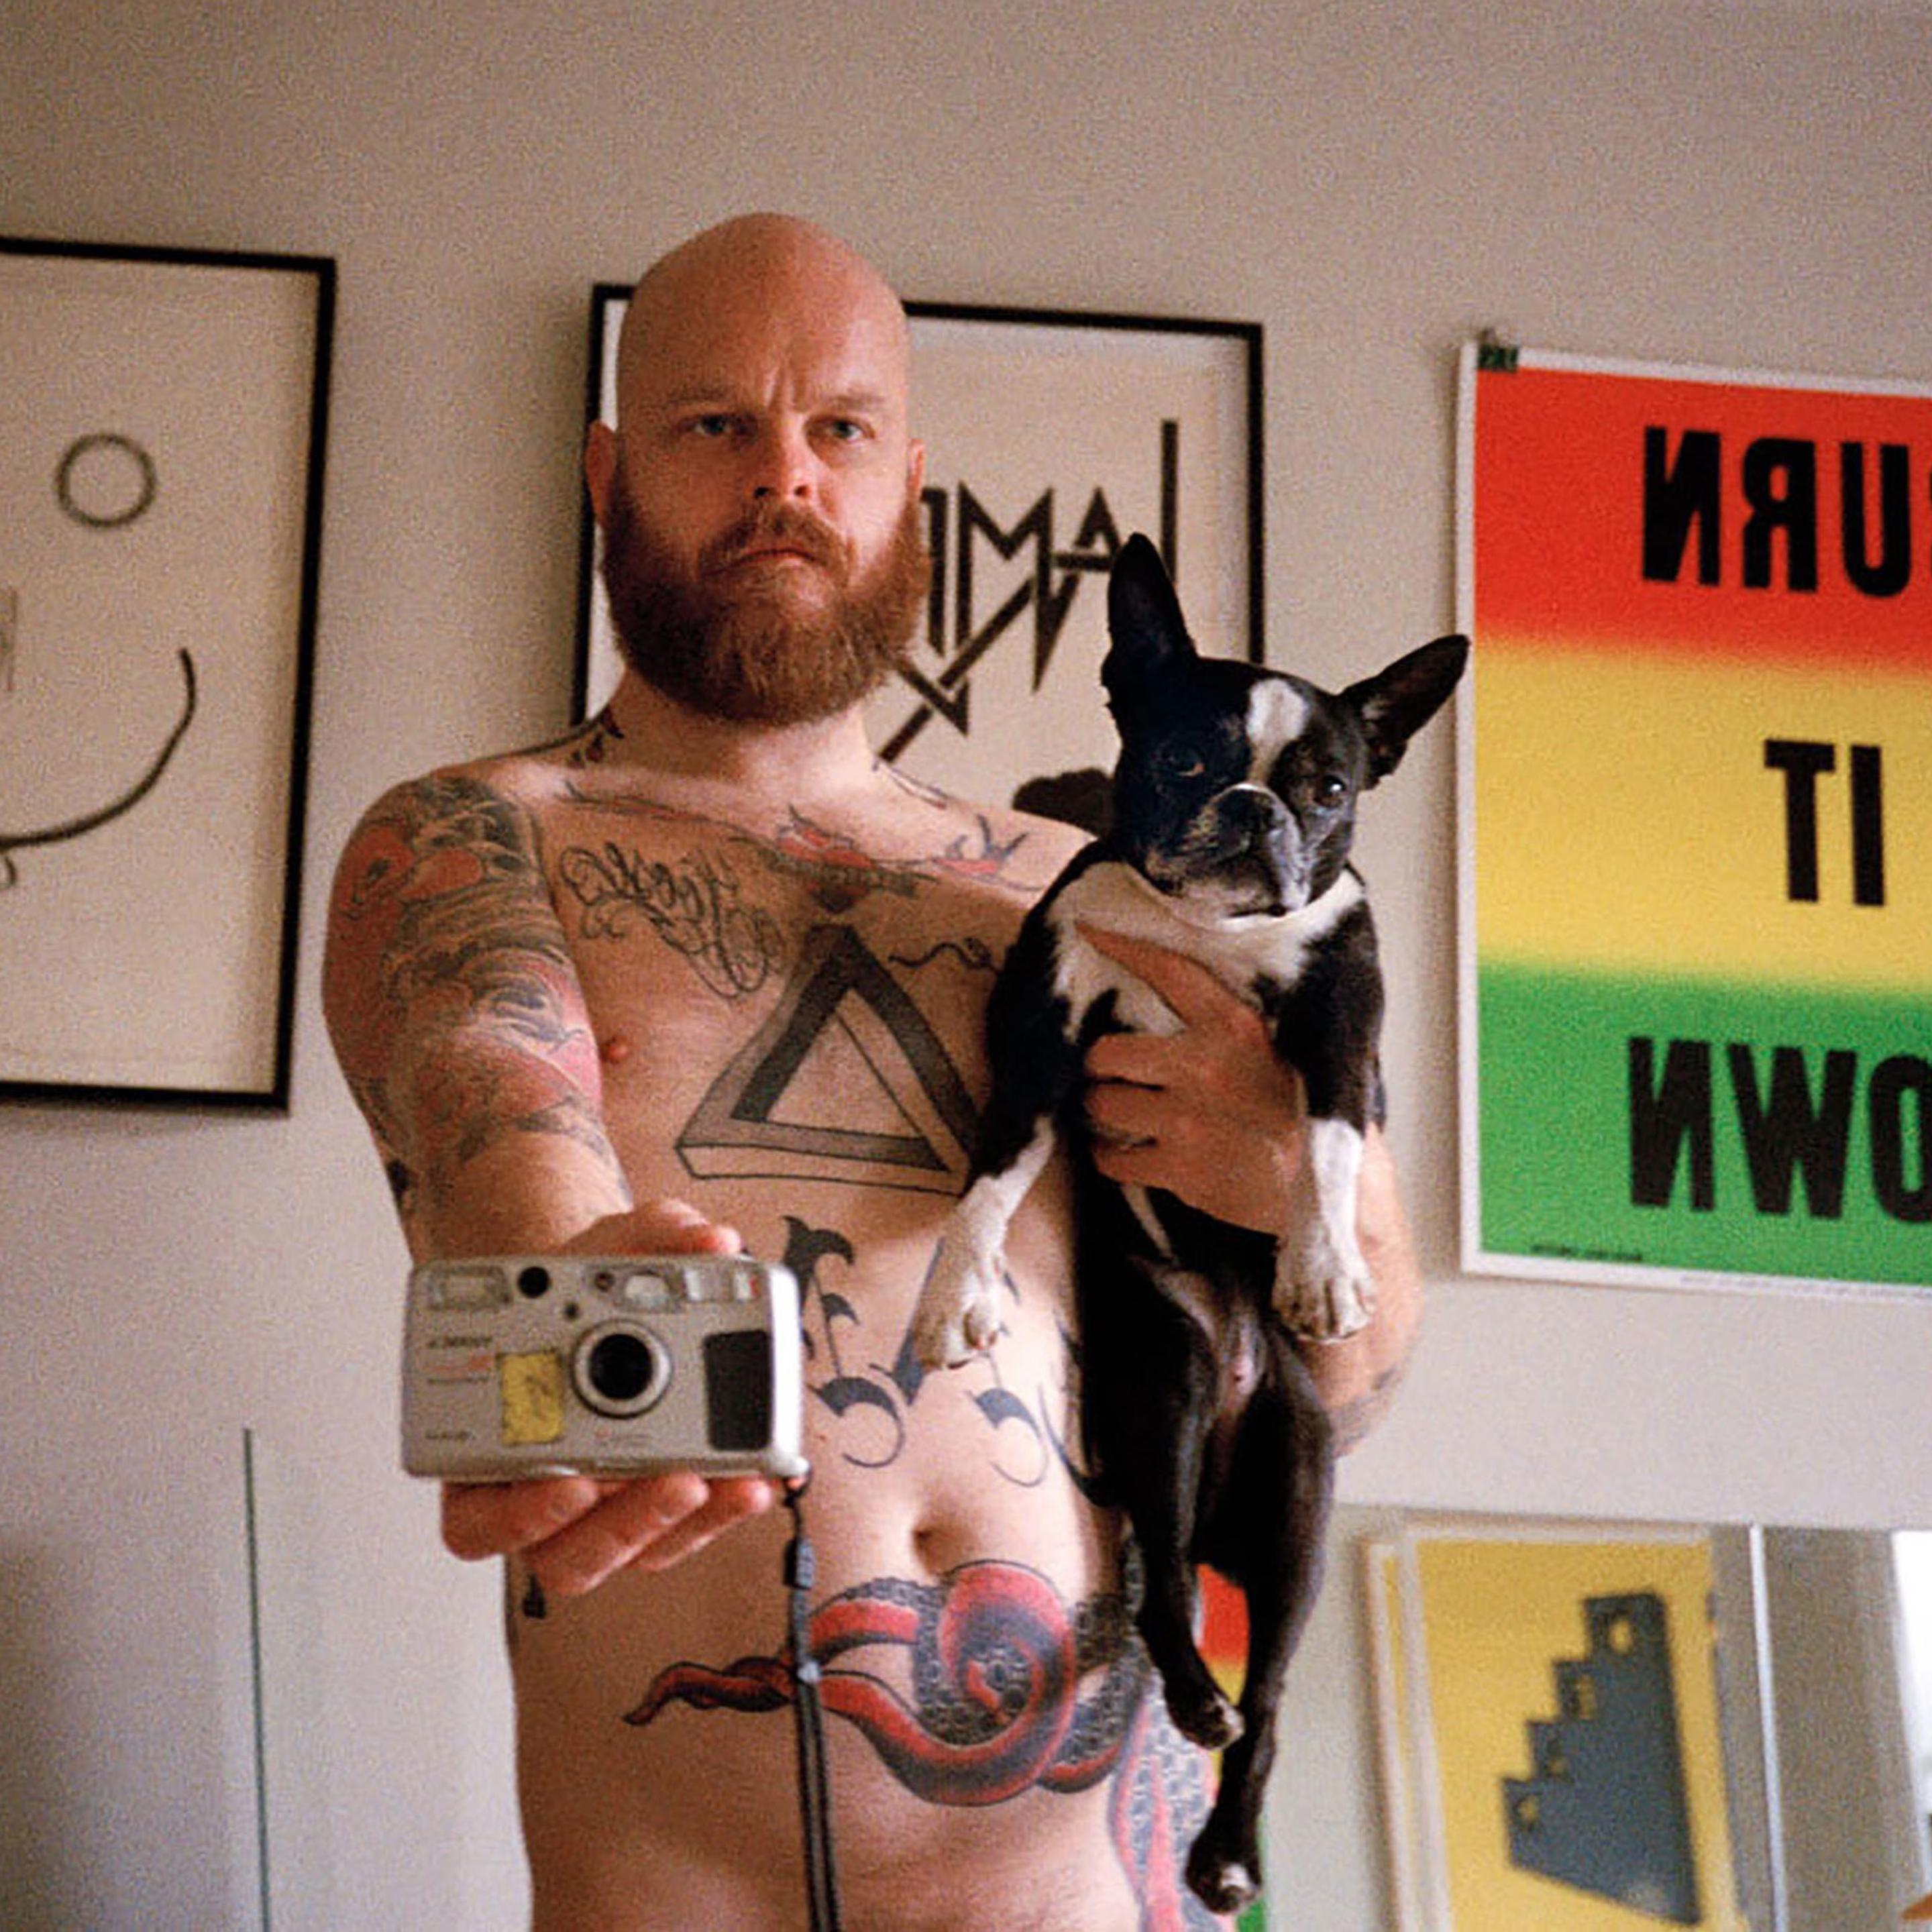 Shannon Michael Cane takes a nude selfie in a mirror, holding a french bulldog in one hand and the film camera in the other.